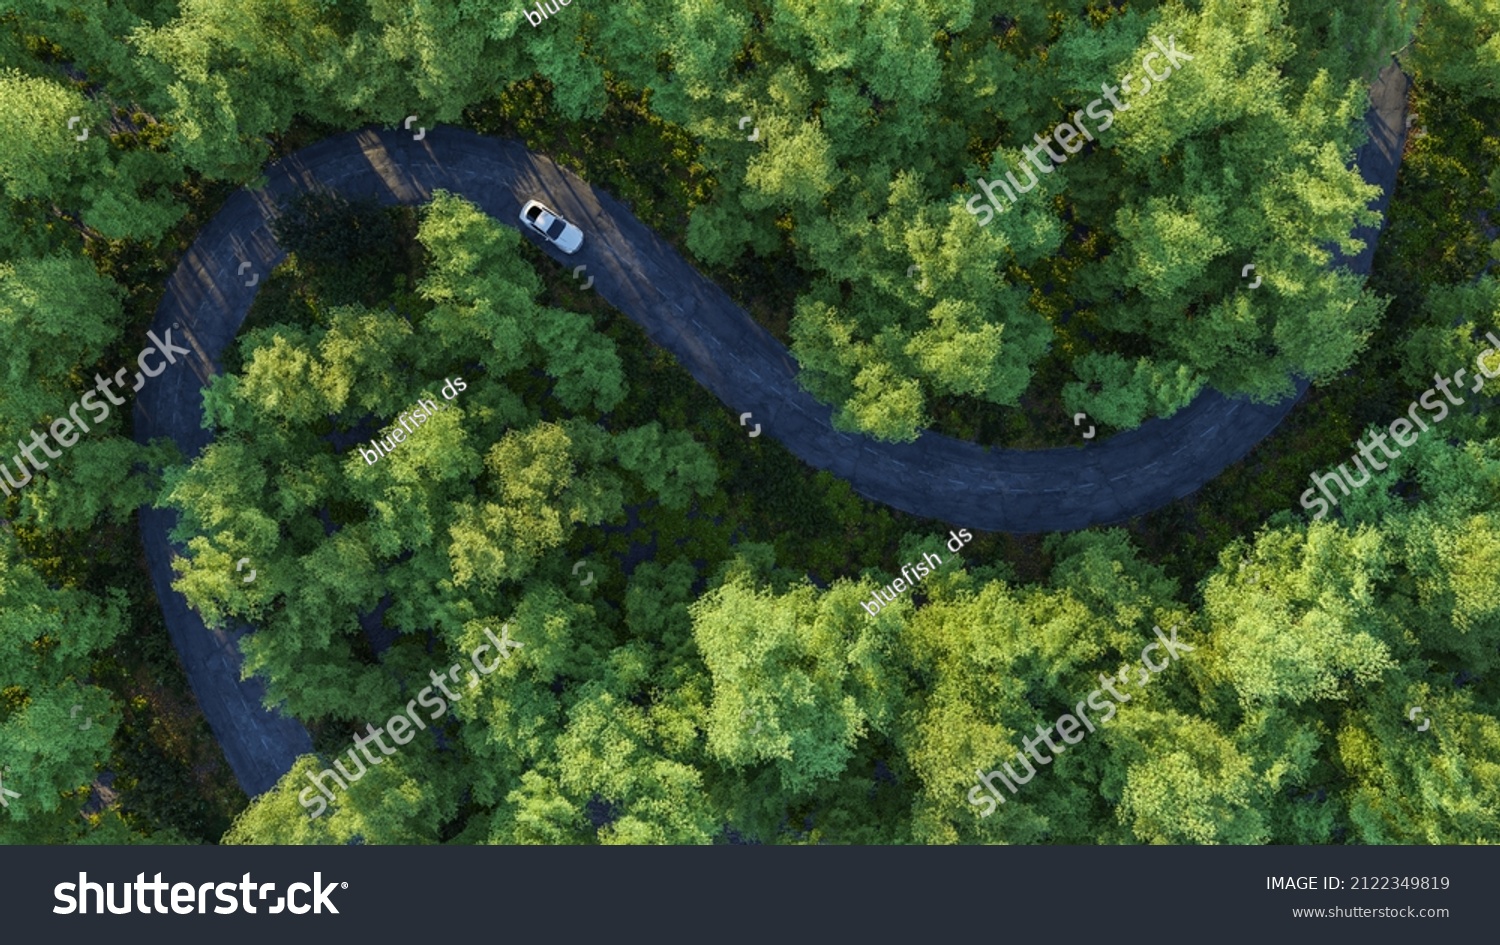 Adventure morning road trip in the forest, aerial view of a car on deep jungle road. On The Road Again concept. #2122349819